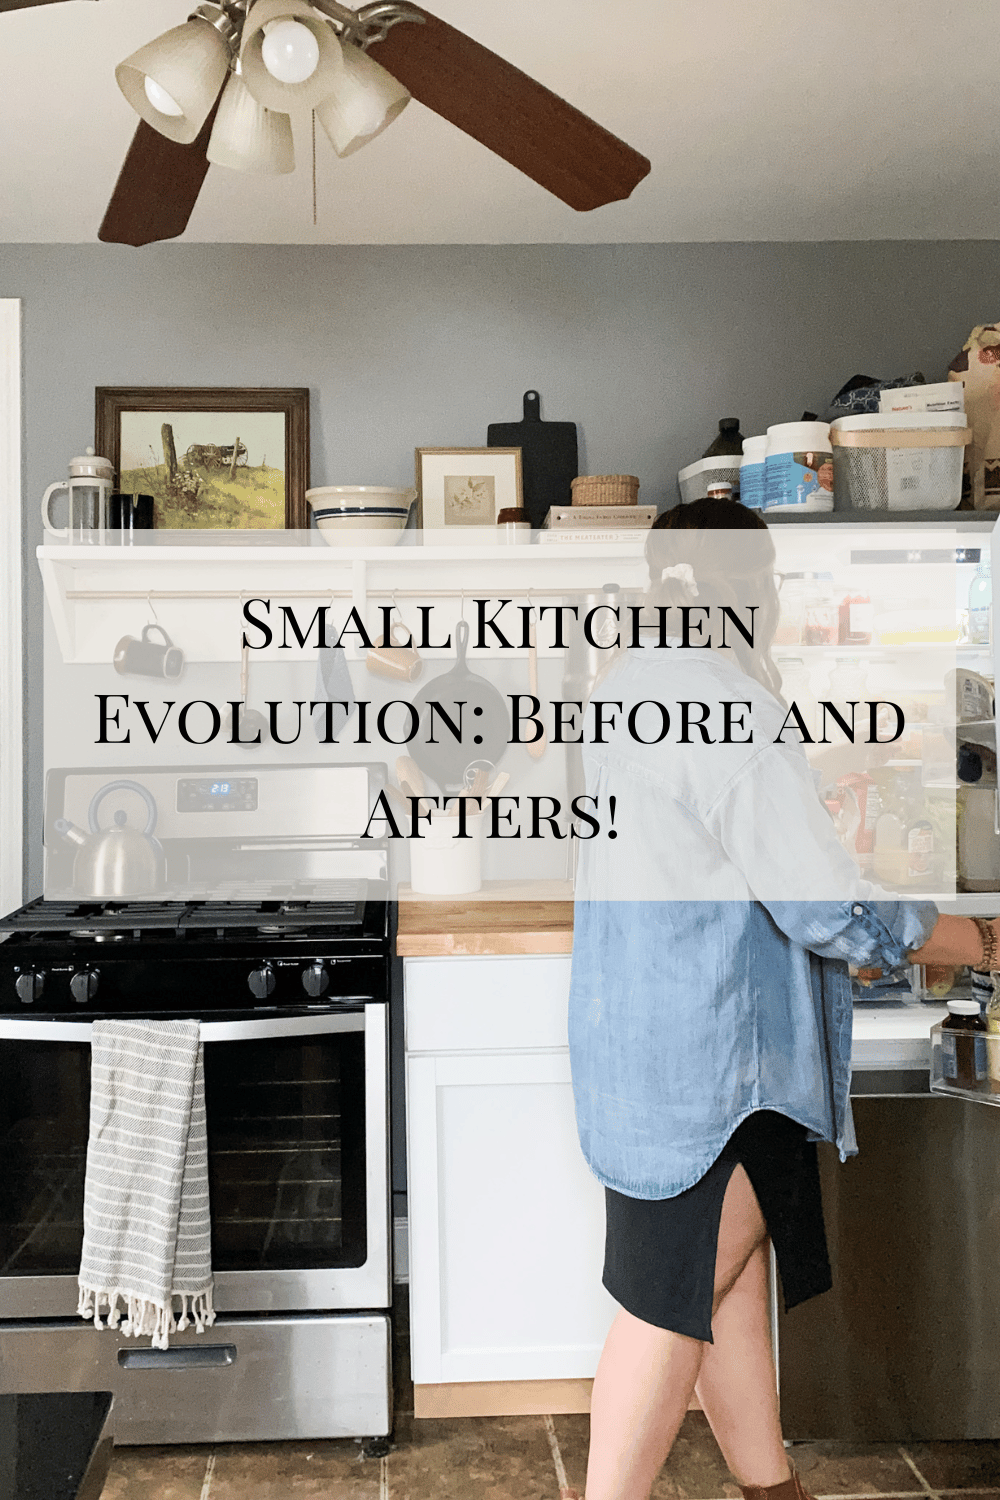 Small Kitchen Evolution: Before and Afters!